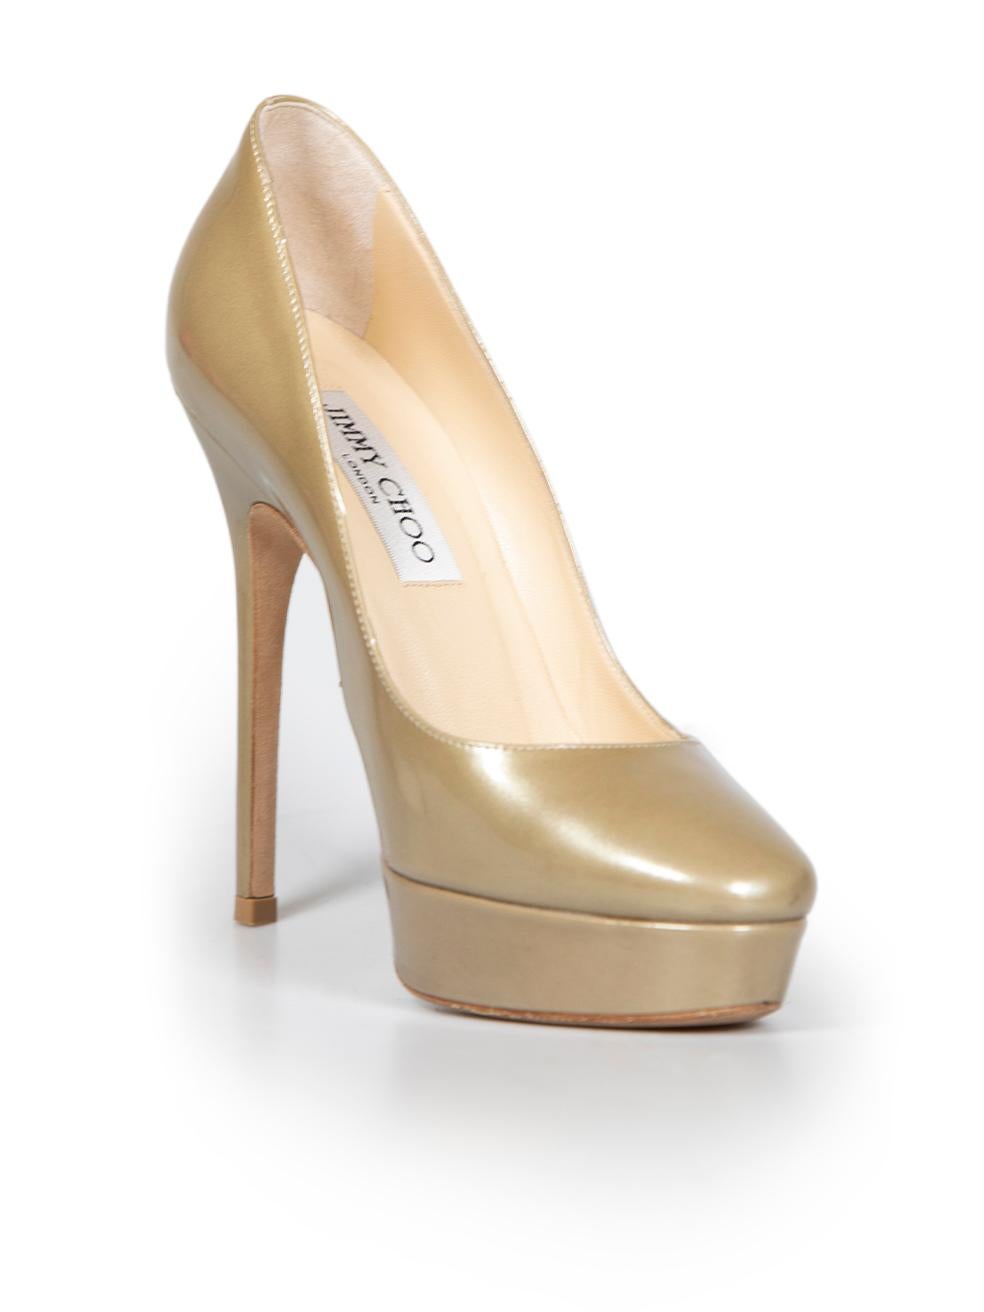 CONDITION is Very good. Minimal wear to heels is evident. Minimal wear to soles with some abrasions to the right side and left side of the right shoe on this used Jimmy Choo designer resale item.
 
 
 
 Details
 
 
 Gold
 
 Patent leather
 
 Slip on